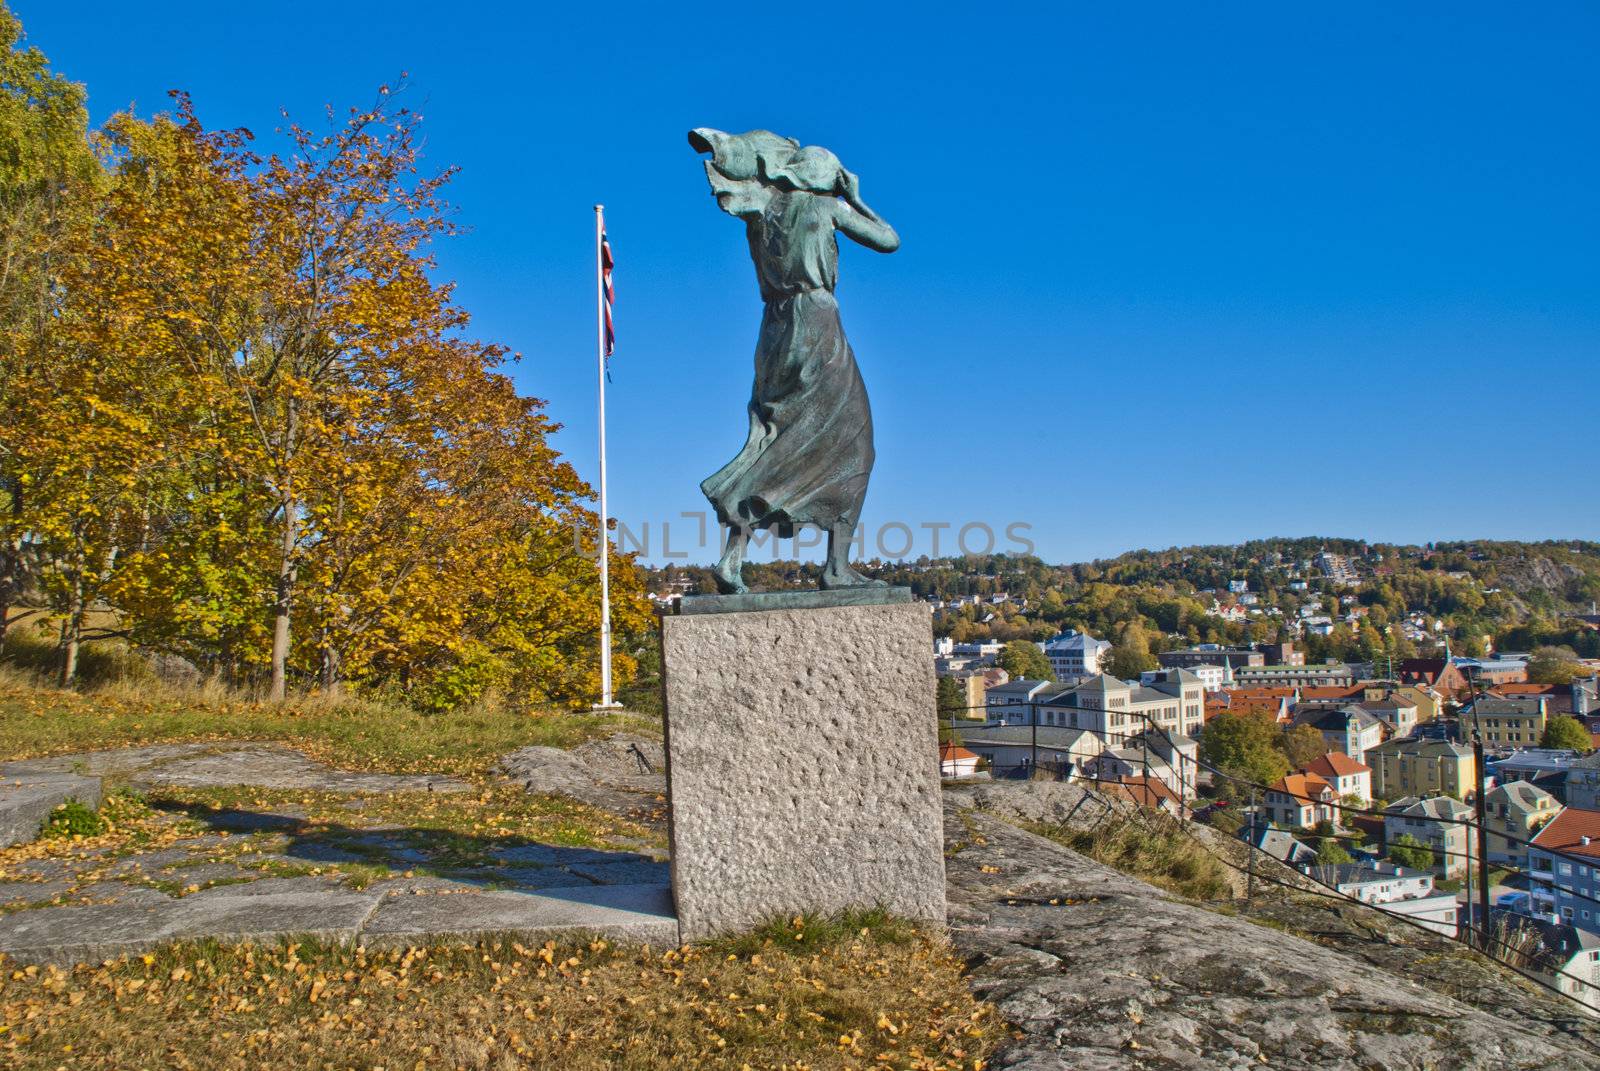 joseph grimeland (born January 2, 1916 in oslo, died 10 october 2002) was a norwegian sculptor and this monument stands on top of the "rødsberg" (roedsberg) mountain in halden city and overlooks the town, image is shot in october 2012.